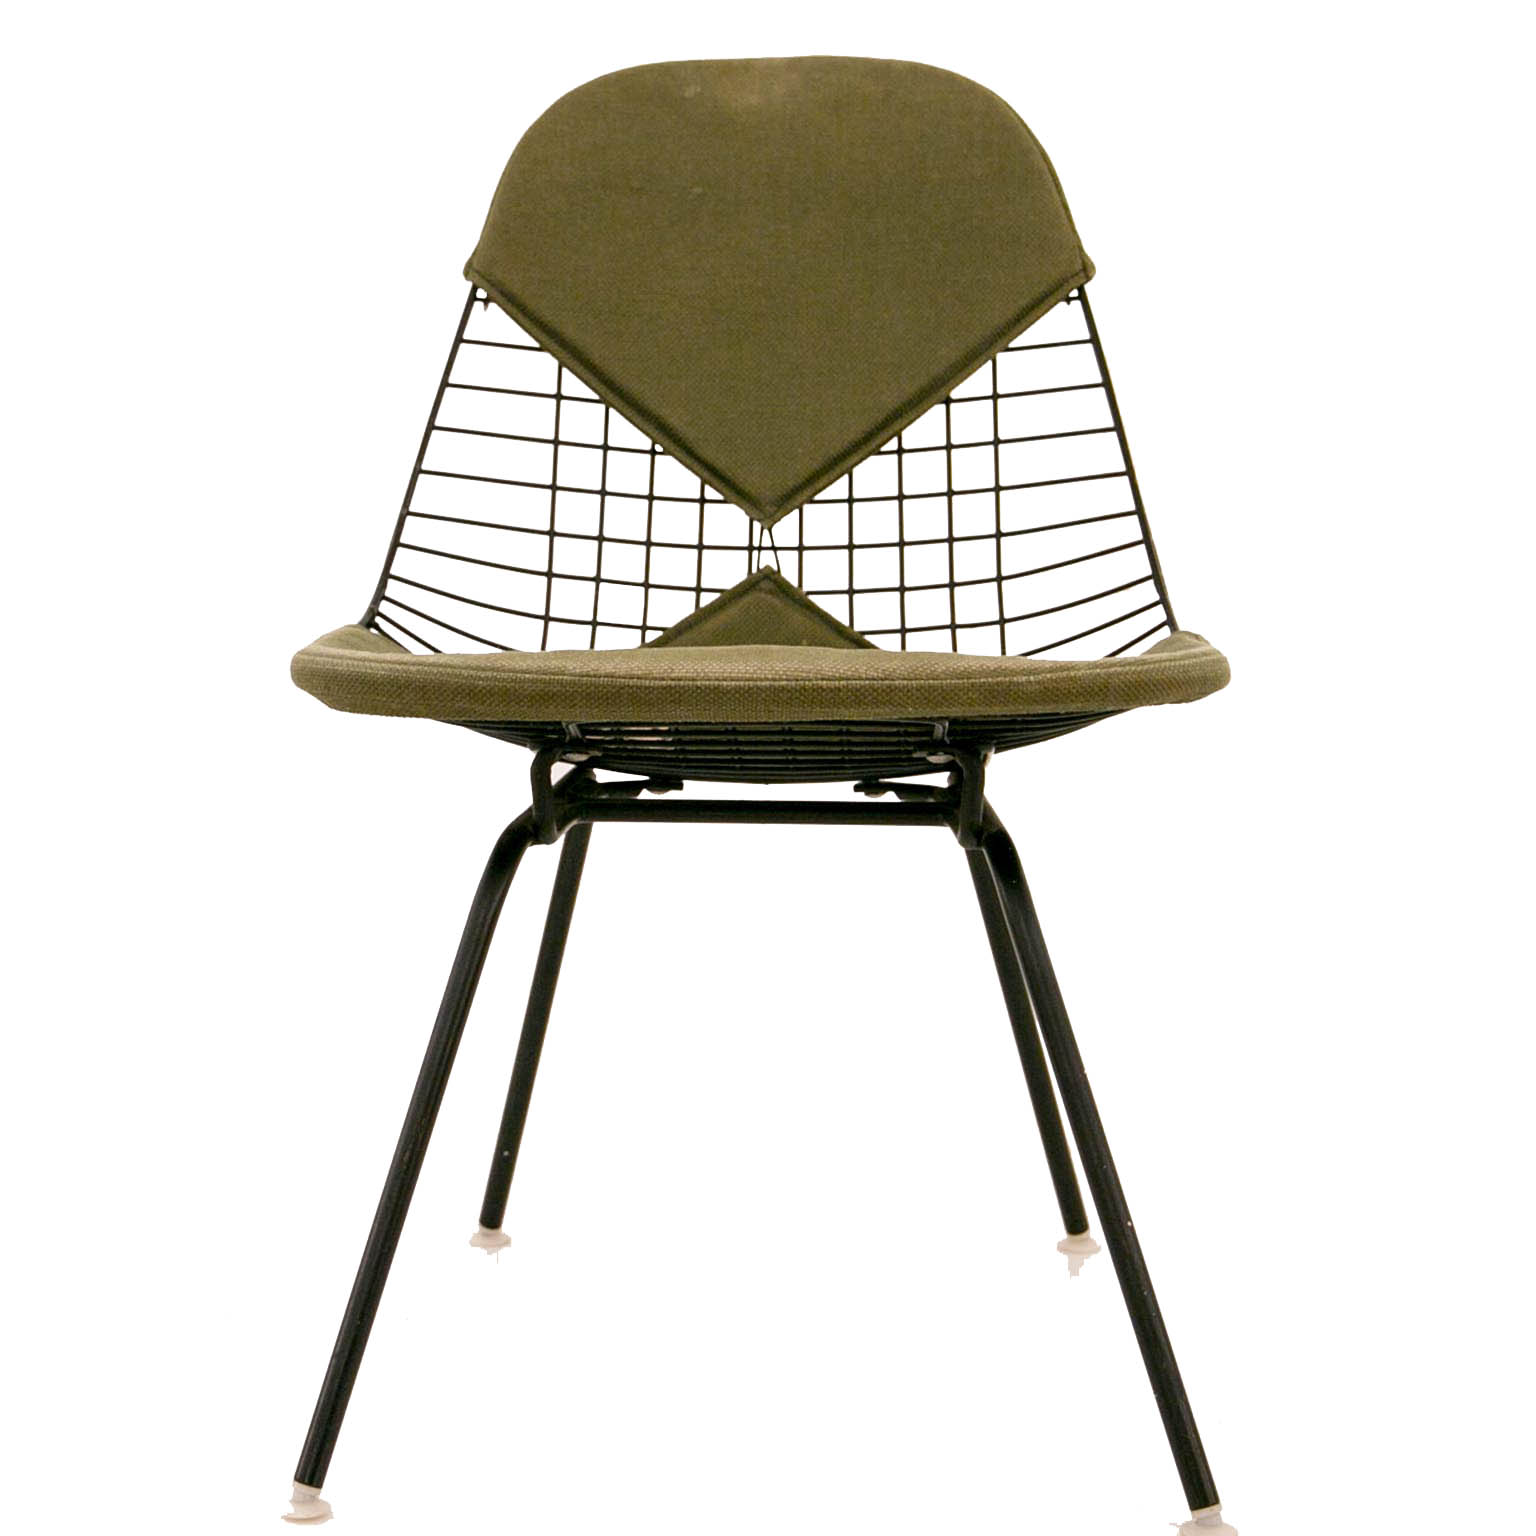 MKX-2 wire side chair by Charles Eames for Herman Miller